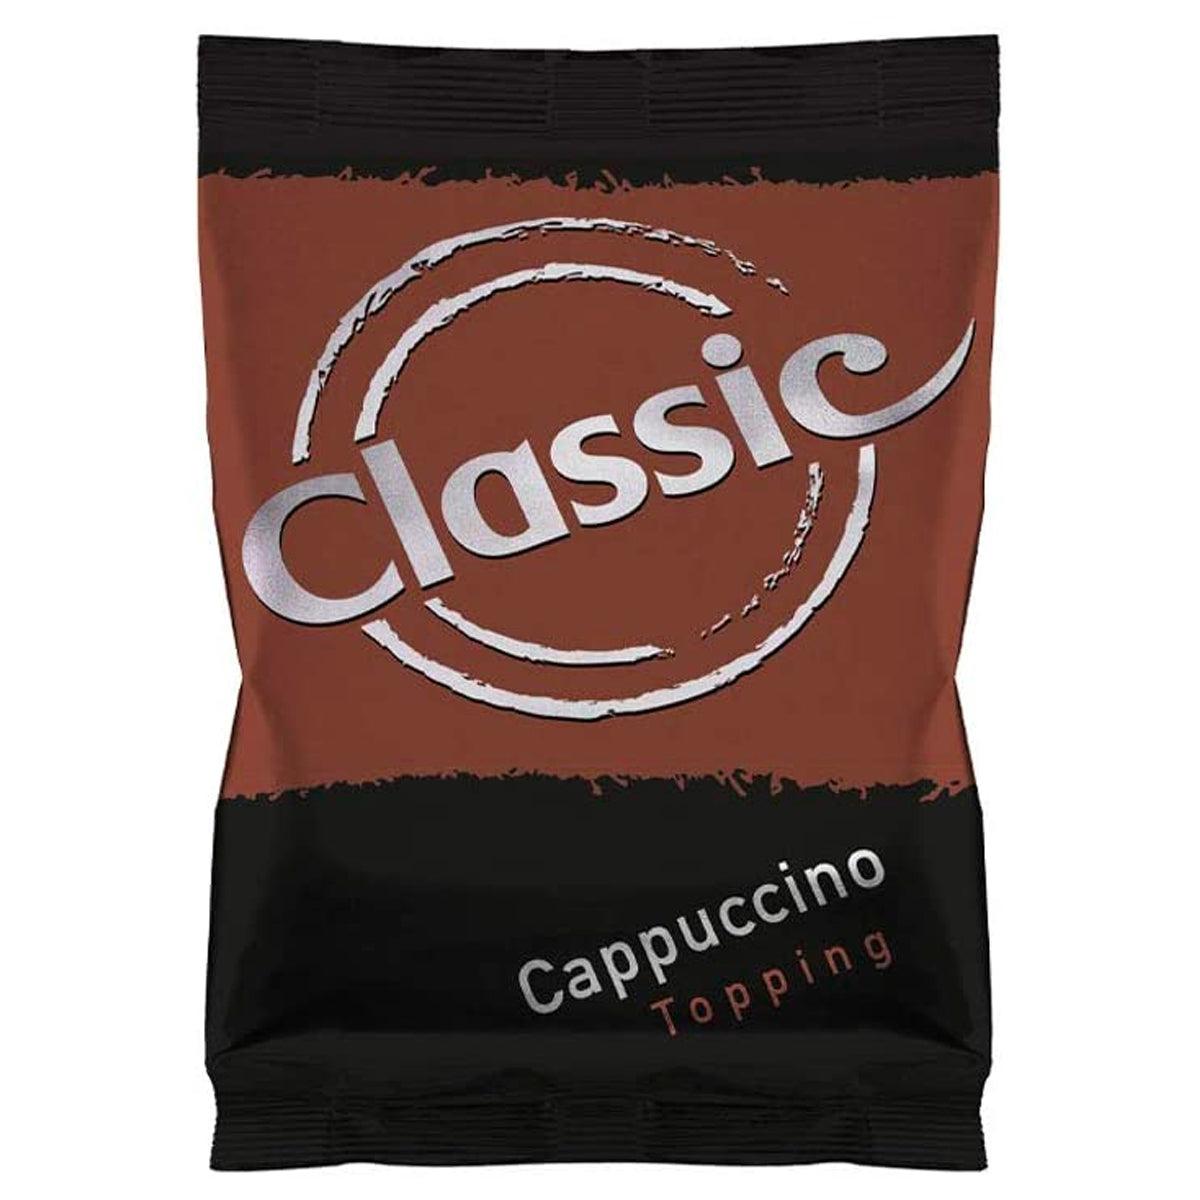 Classic Cappuccino Topping - 10 x 750g Bags (Full Case) - Vending Superstore